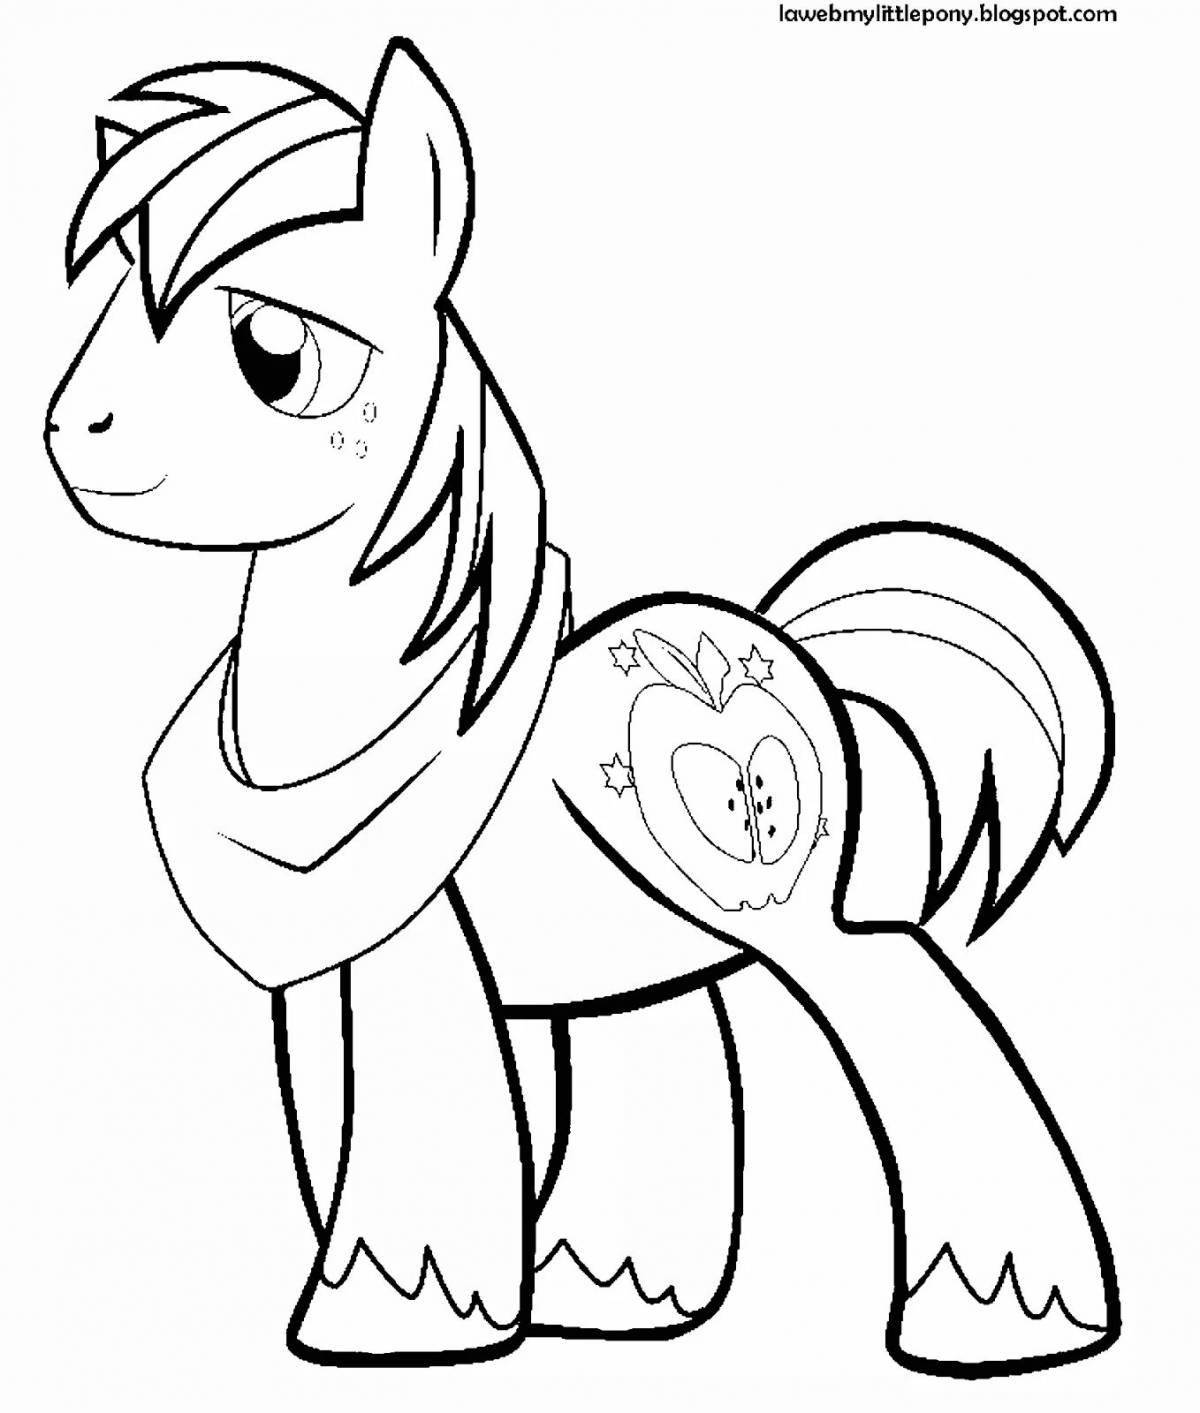 Easy pony coloring book